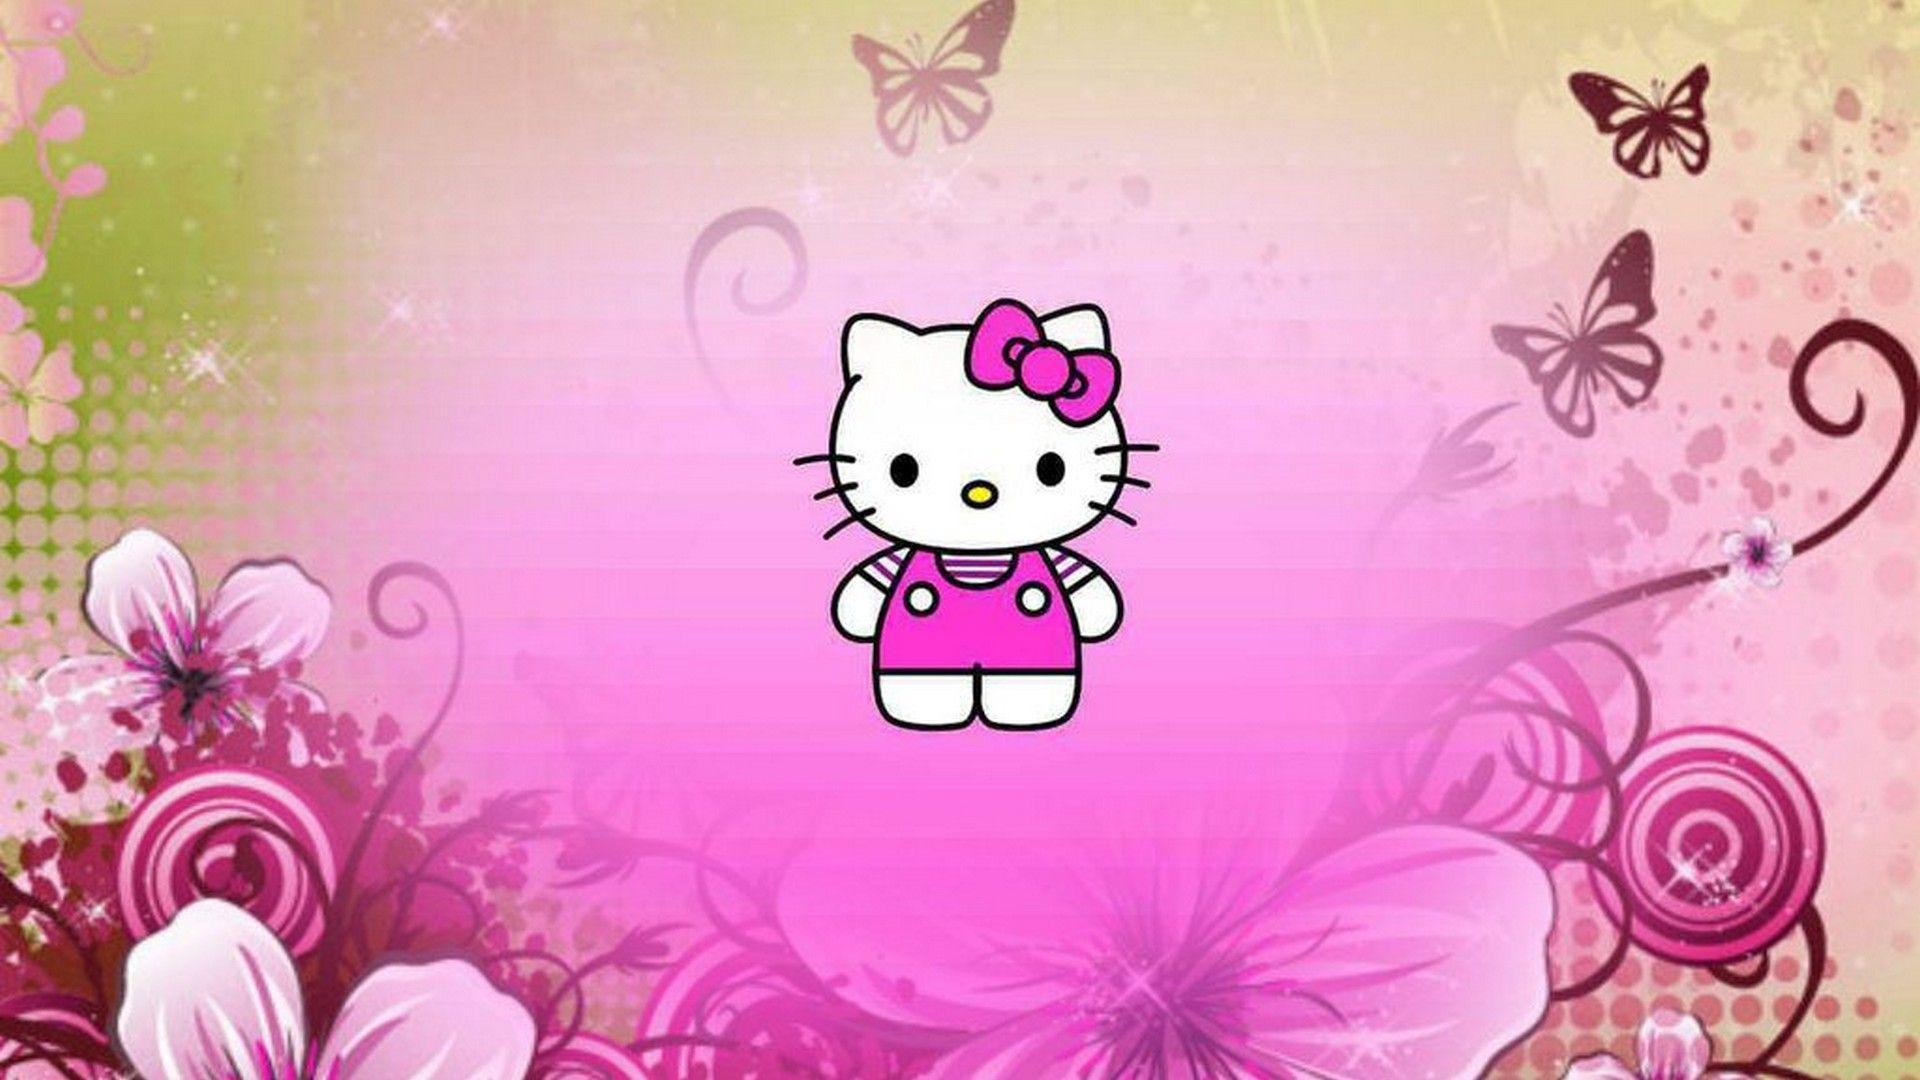 Girly Hello Kitty Wallpapers - Top Free Girly Hello Kitty Backgrounds ...